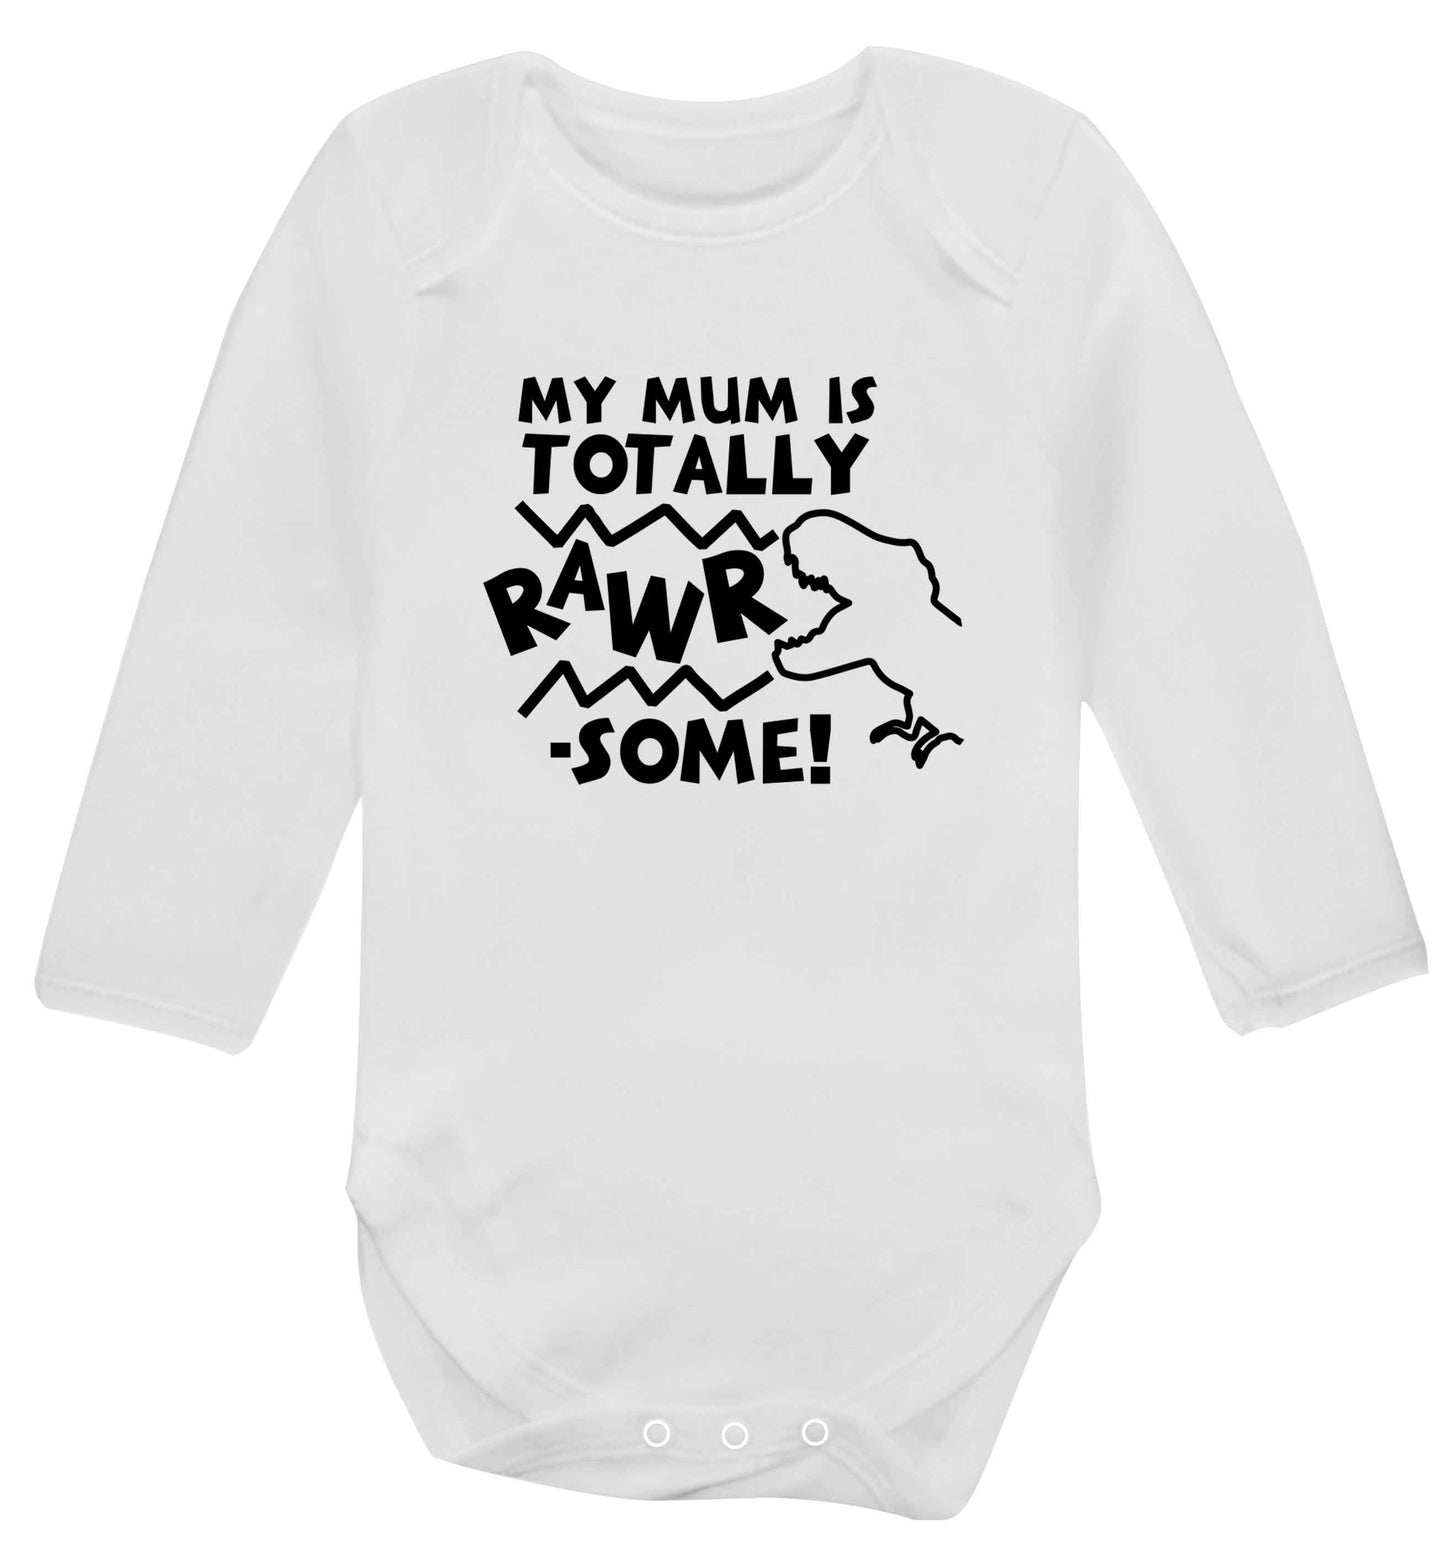 My mum is totally rawrsome baby vest long sleeved white 6-12 months